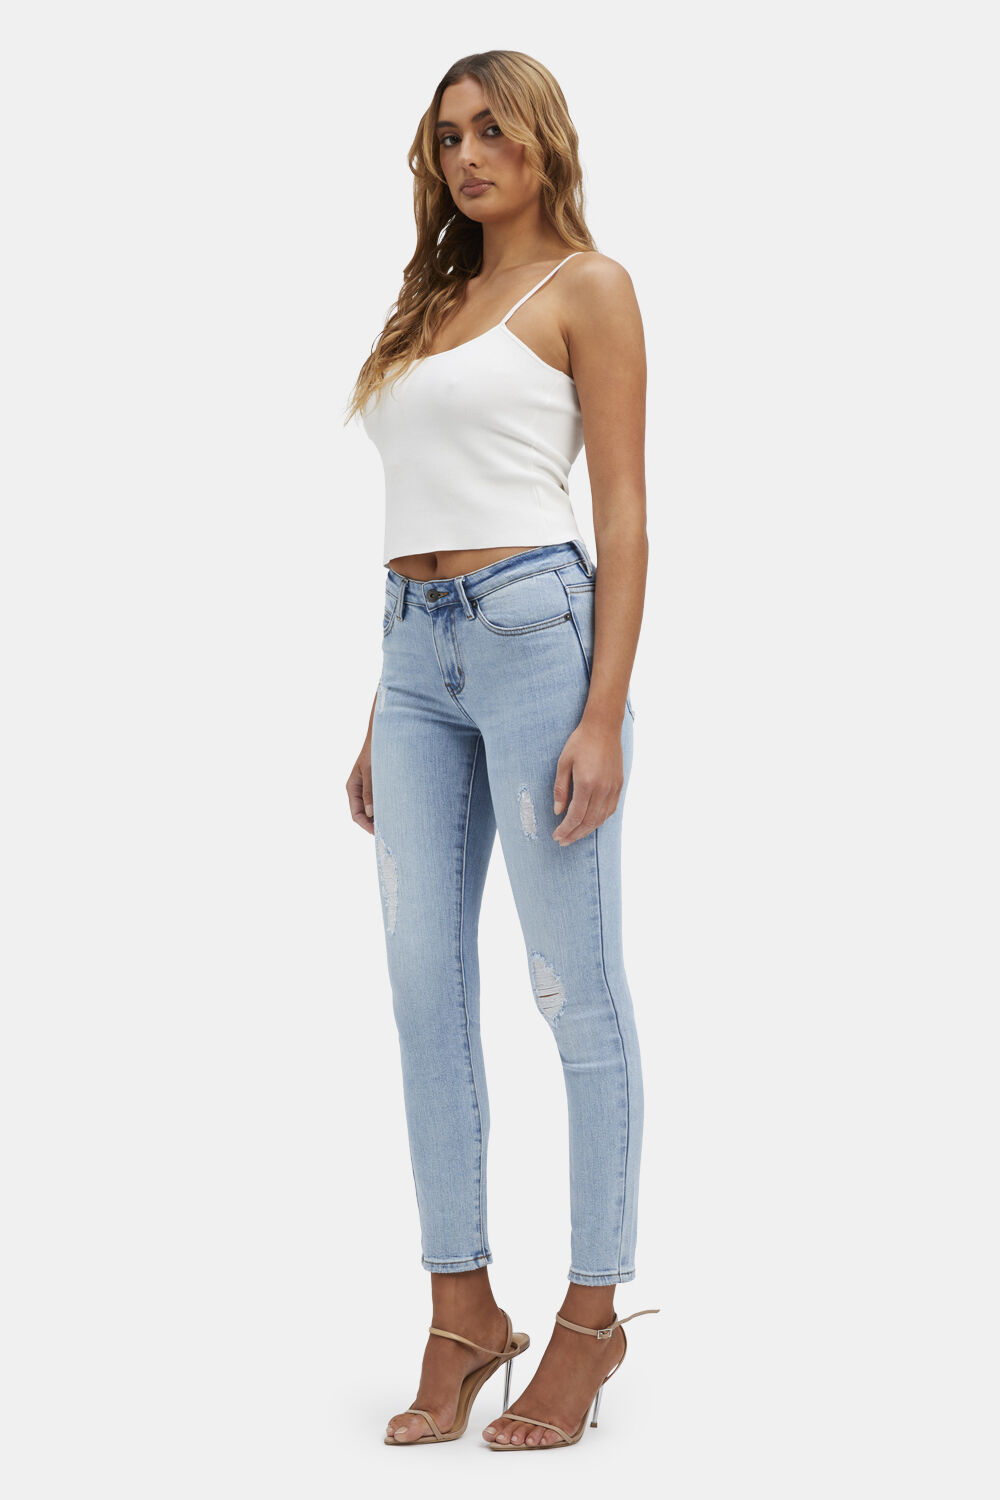 KATE LOW RISE JEAN in colour NIGHTSHADOW BLUE